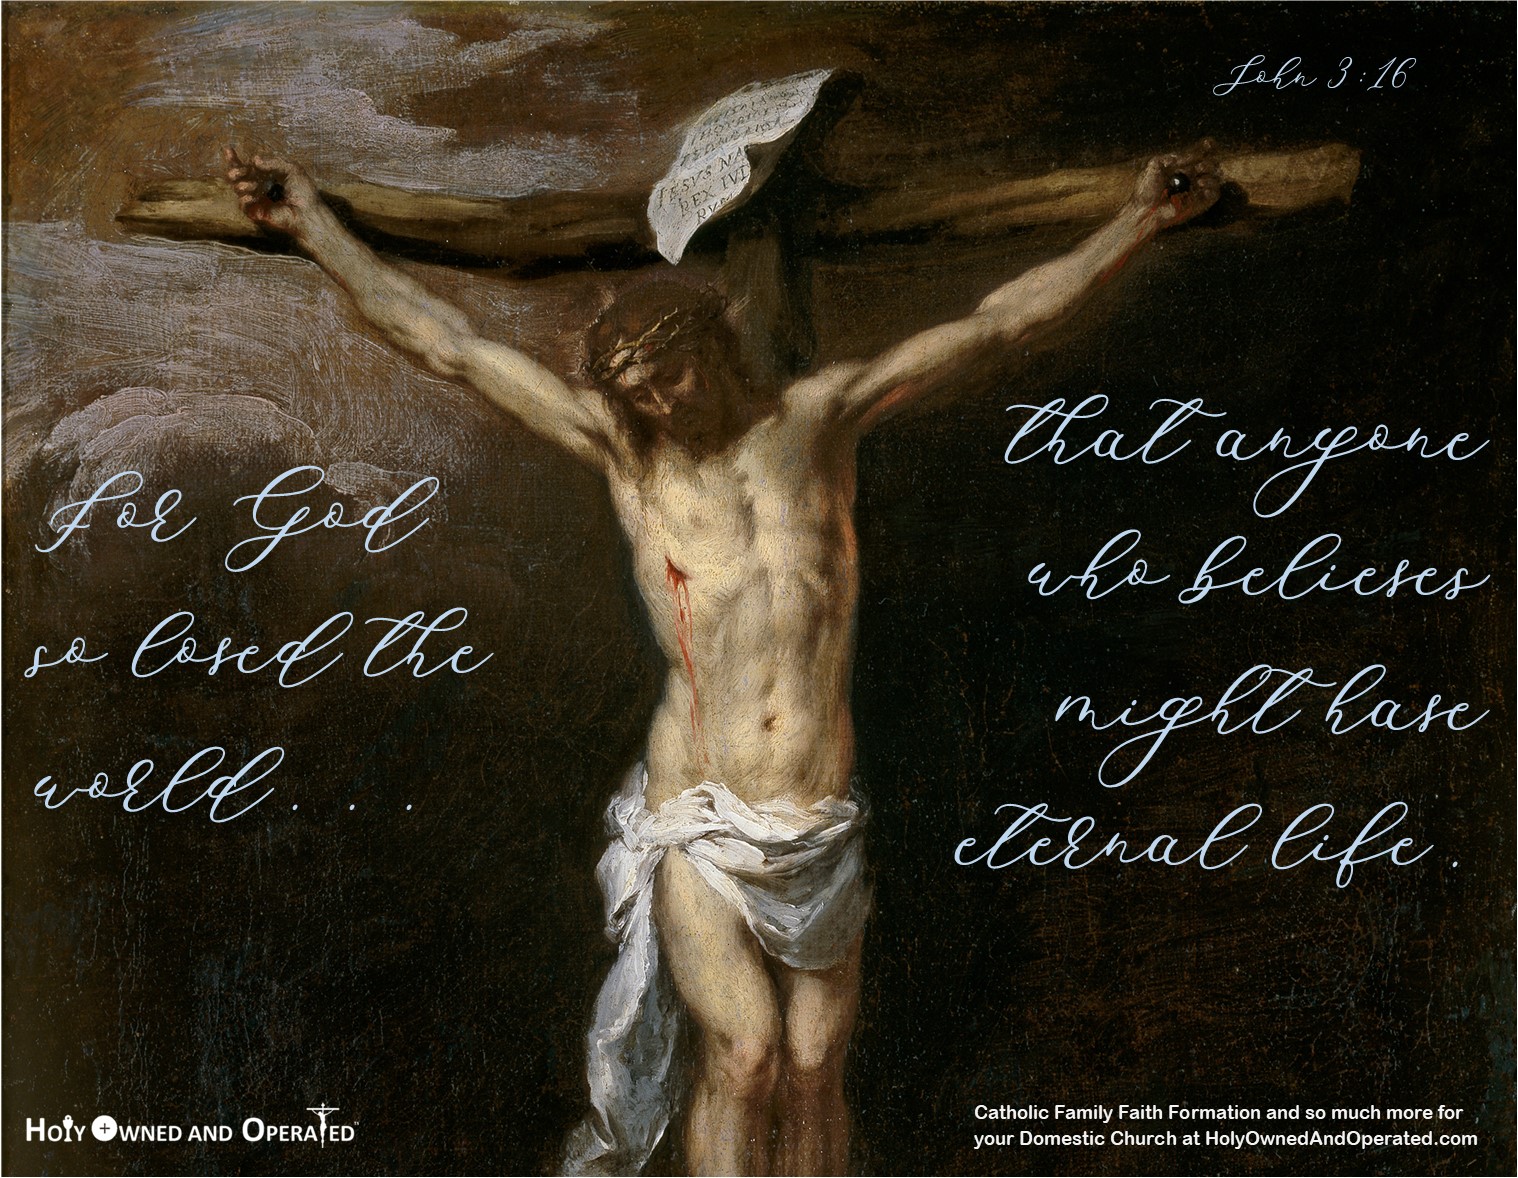 God's Constant Love and Mercy are embodied in an image of oil painting of Jesus on the cross with the words of John 3:16 "For God so loved the world...that any who believes might have eternal life."